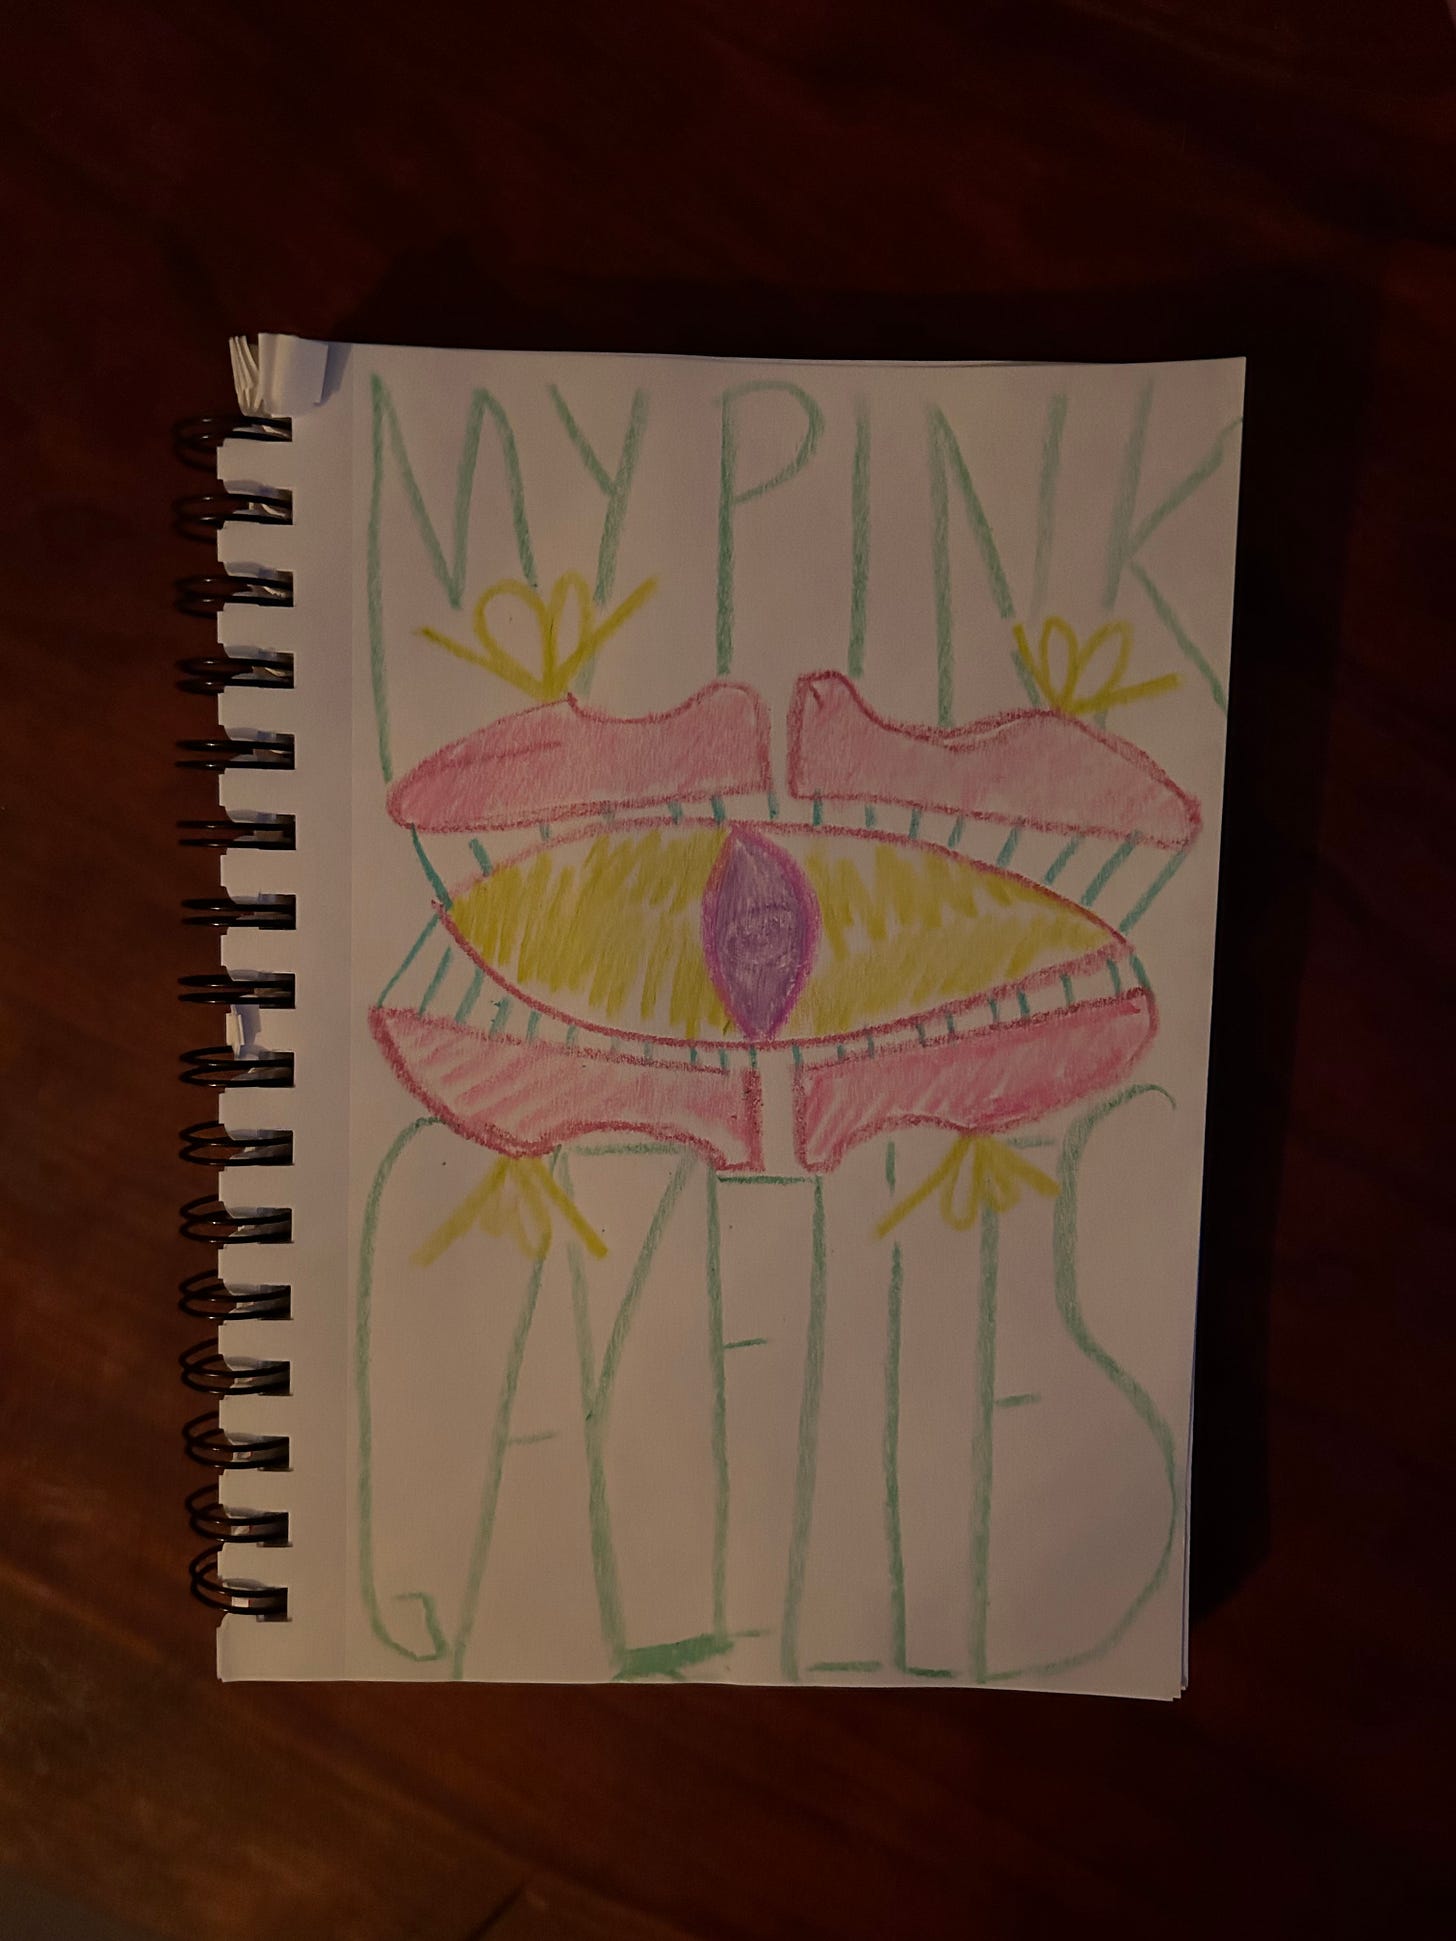 The picture shows a sketchbook with a crayon drawing, featuring a centered eyeball surrounded by pink shoes and the words "MY PINK GAZELLES"